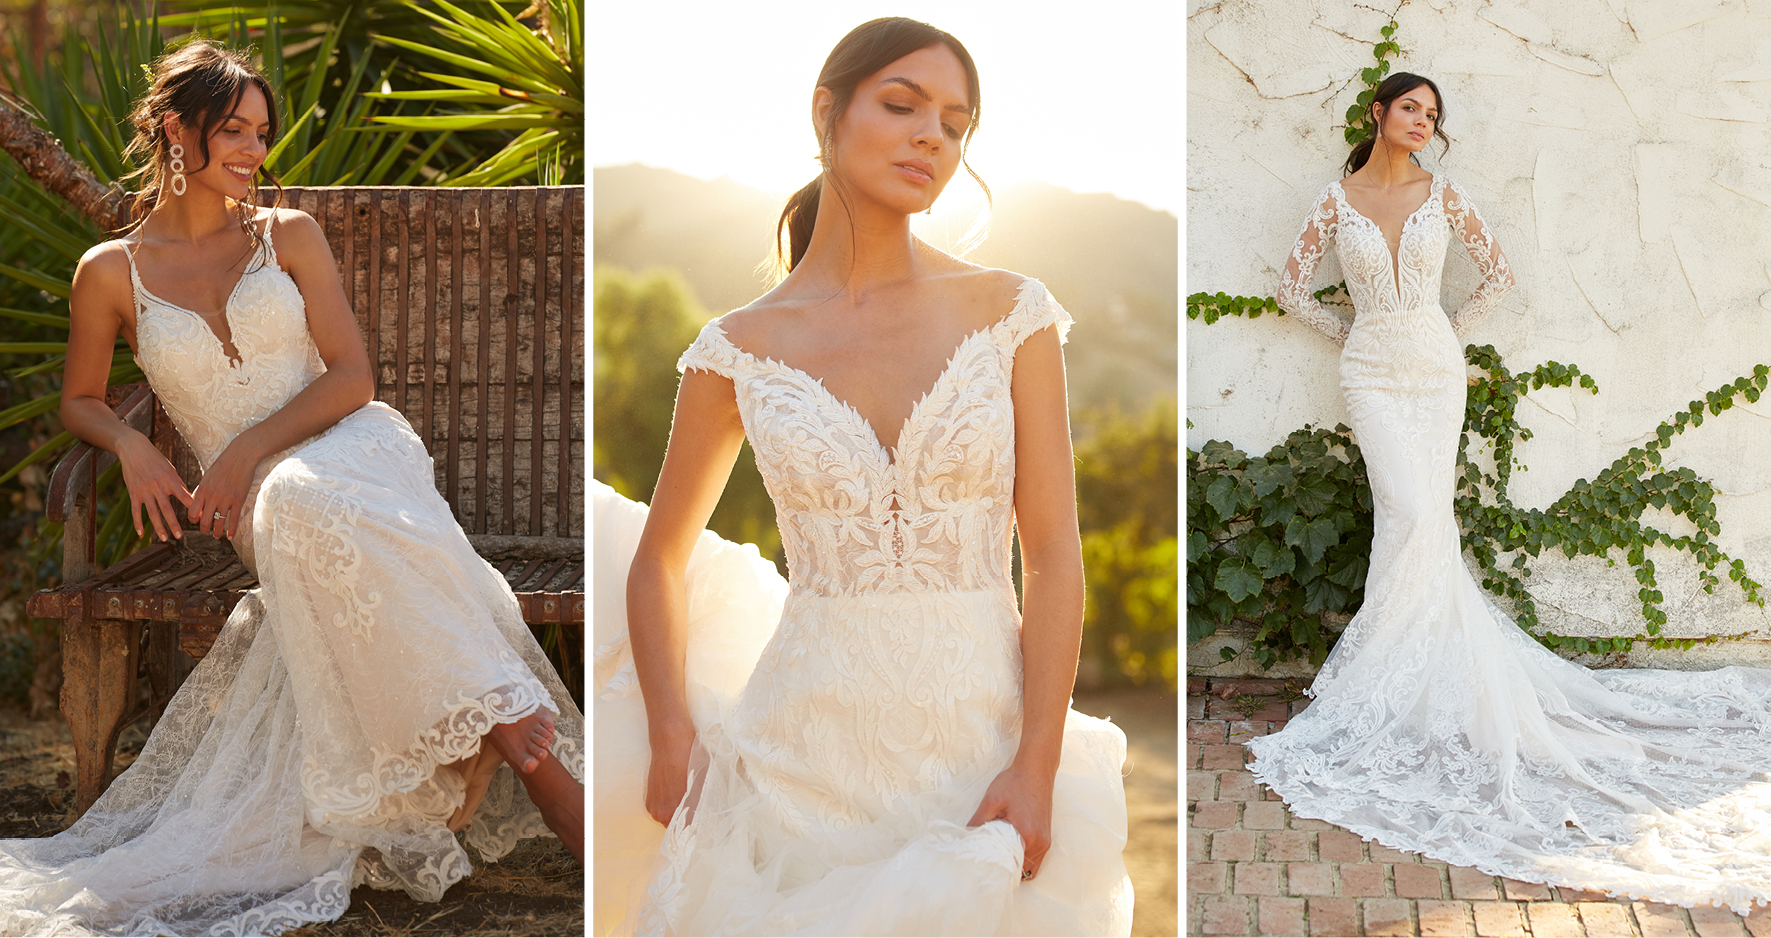 Spanish-Inspired Wedding Blog Post by Maggie Sottero